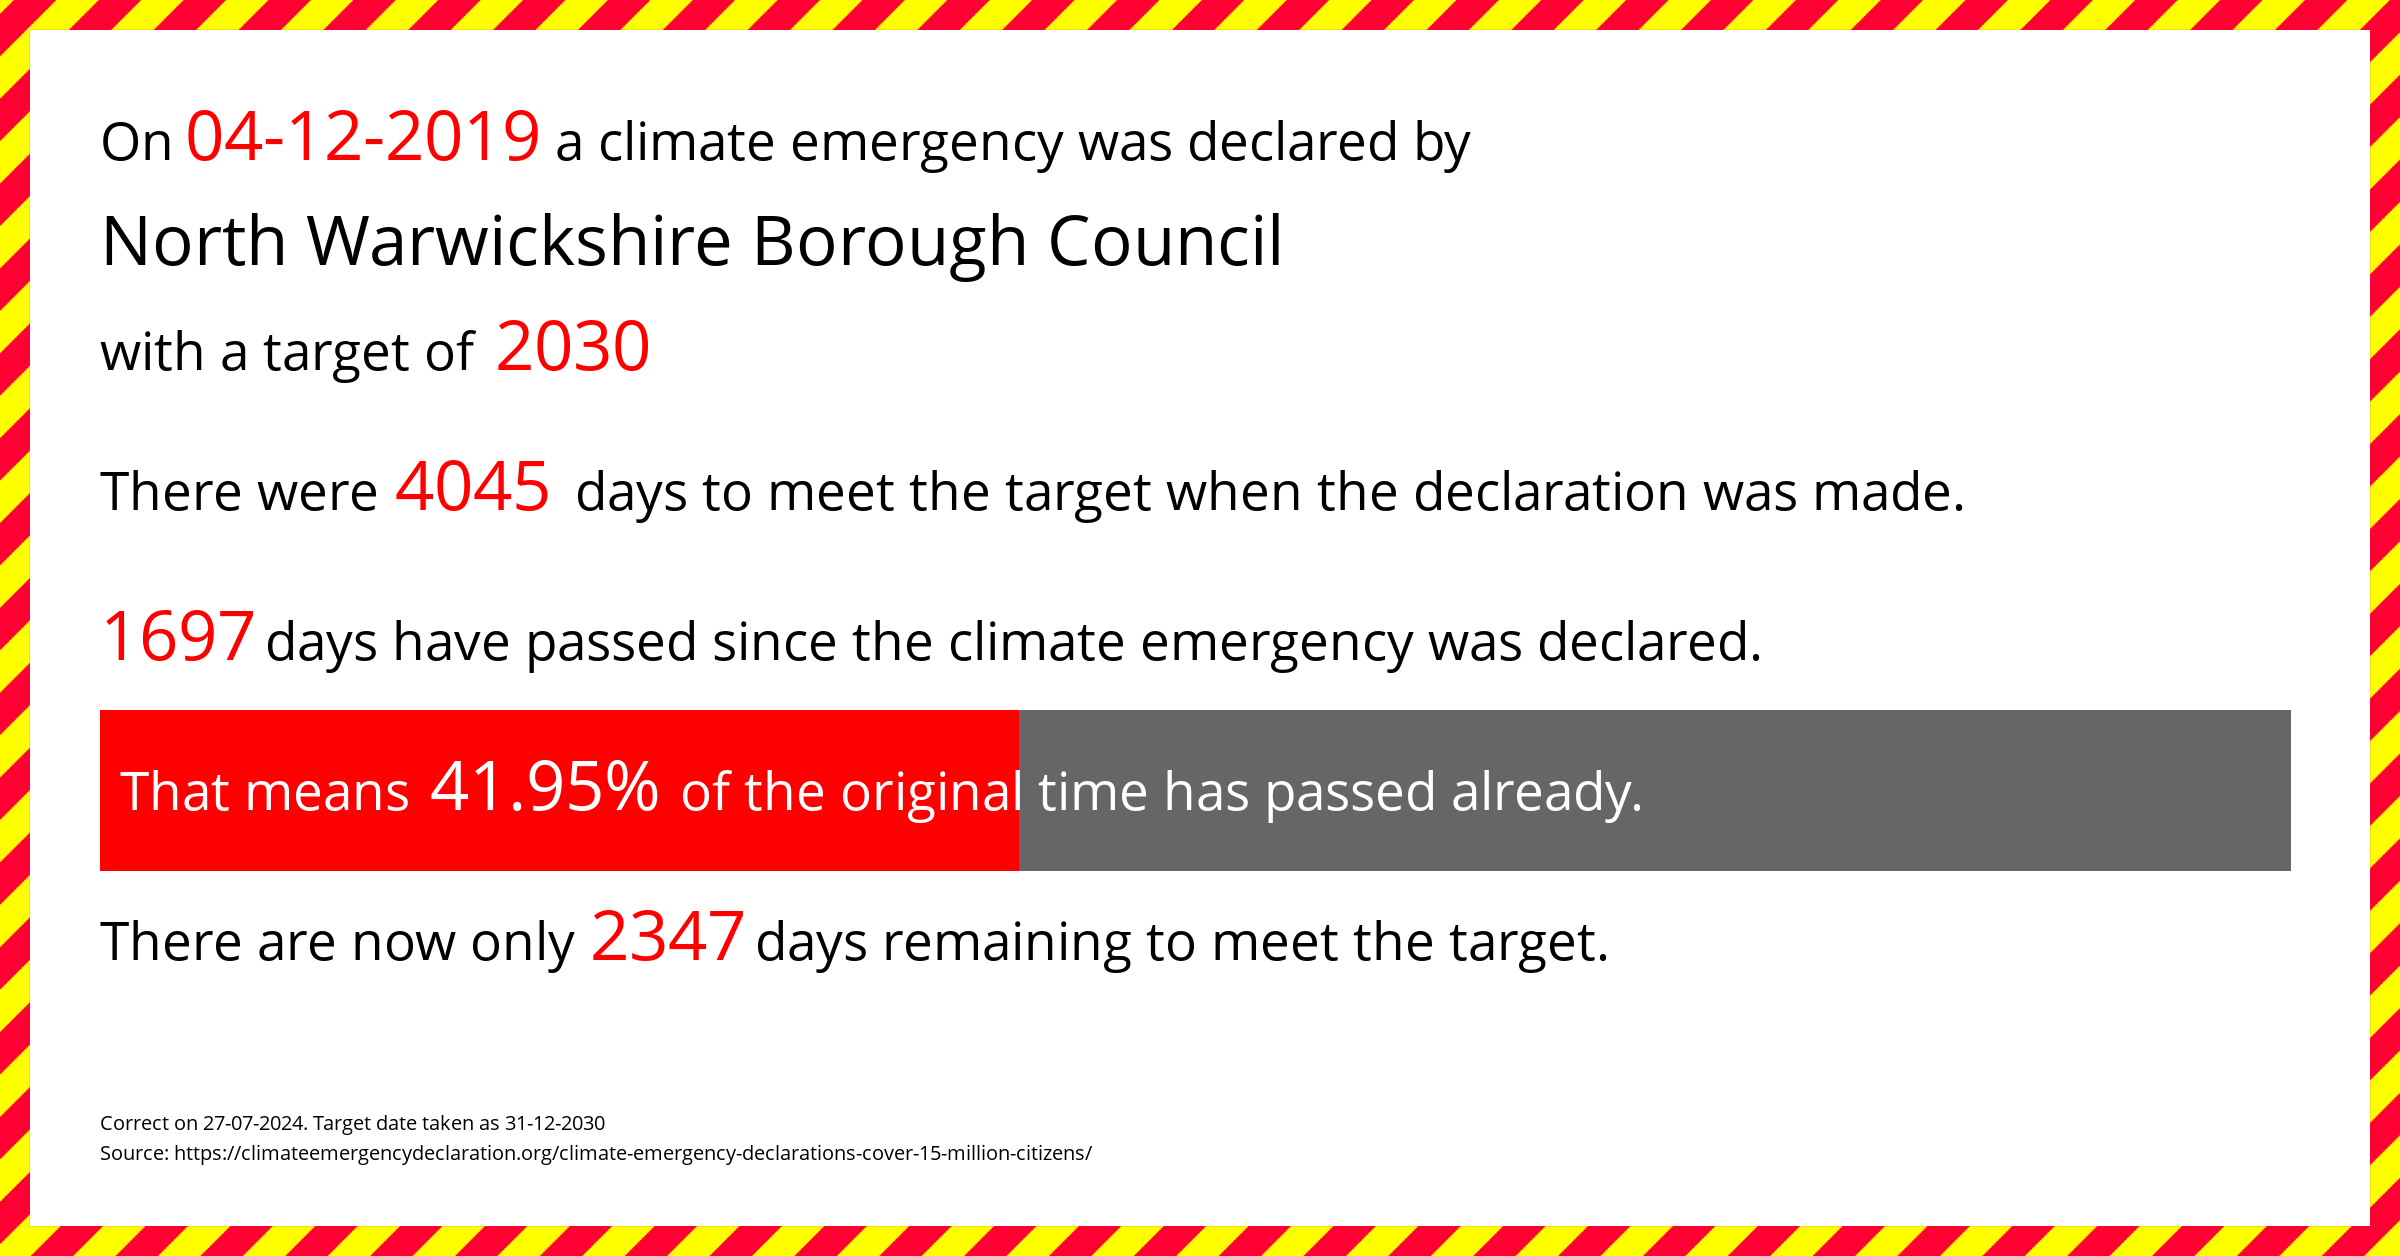 North Warwickshire Borough Council  declared a Climate emergency on Wednesday 4th December 2019, with a target of 2030.